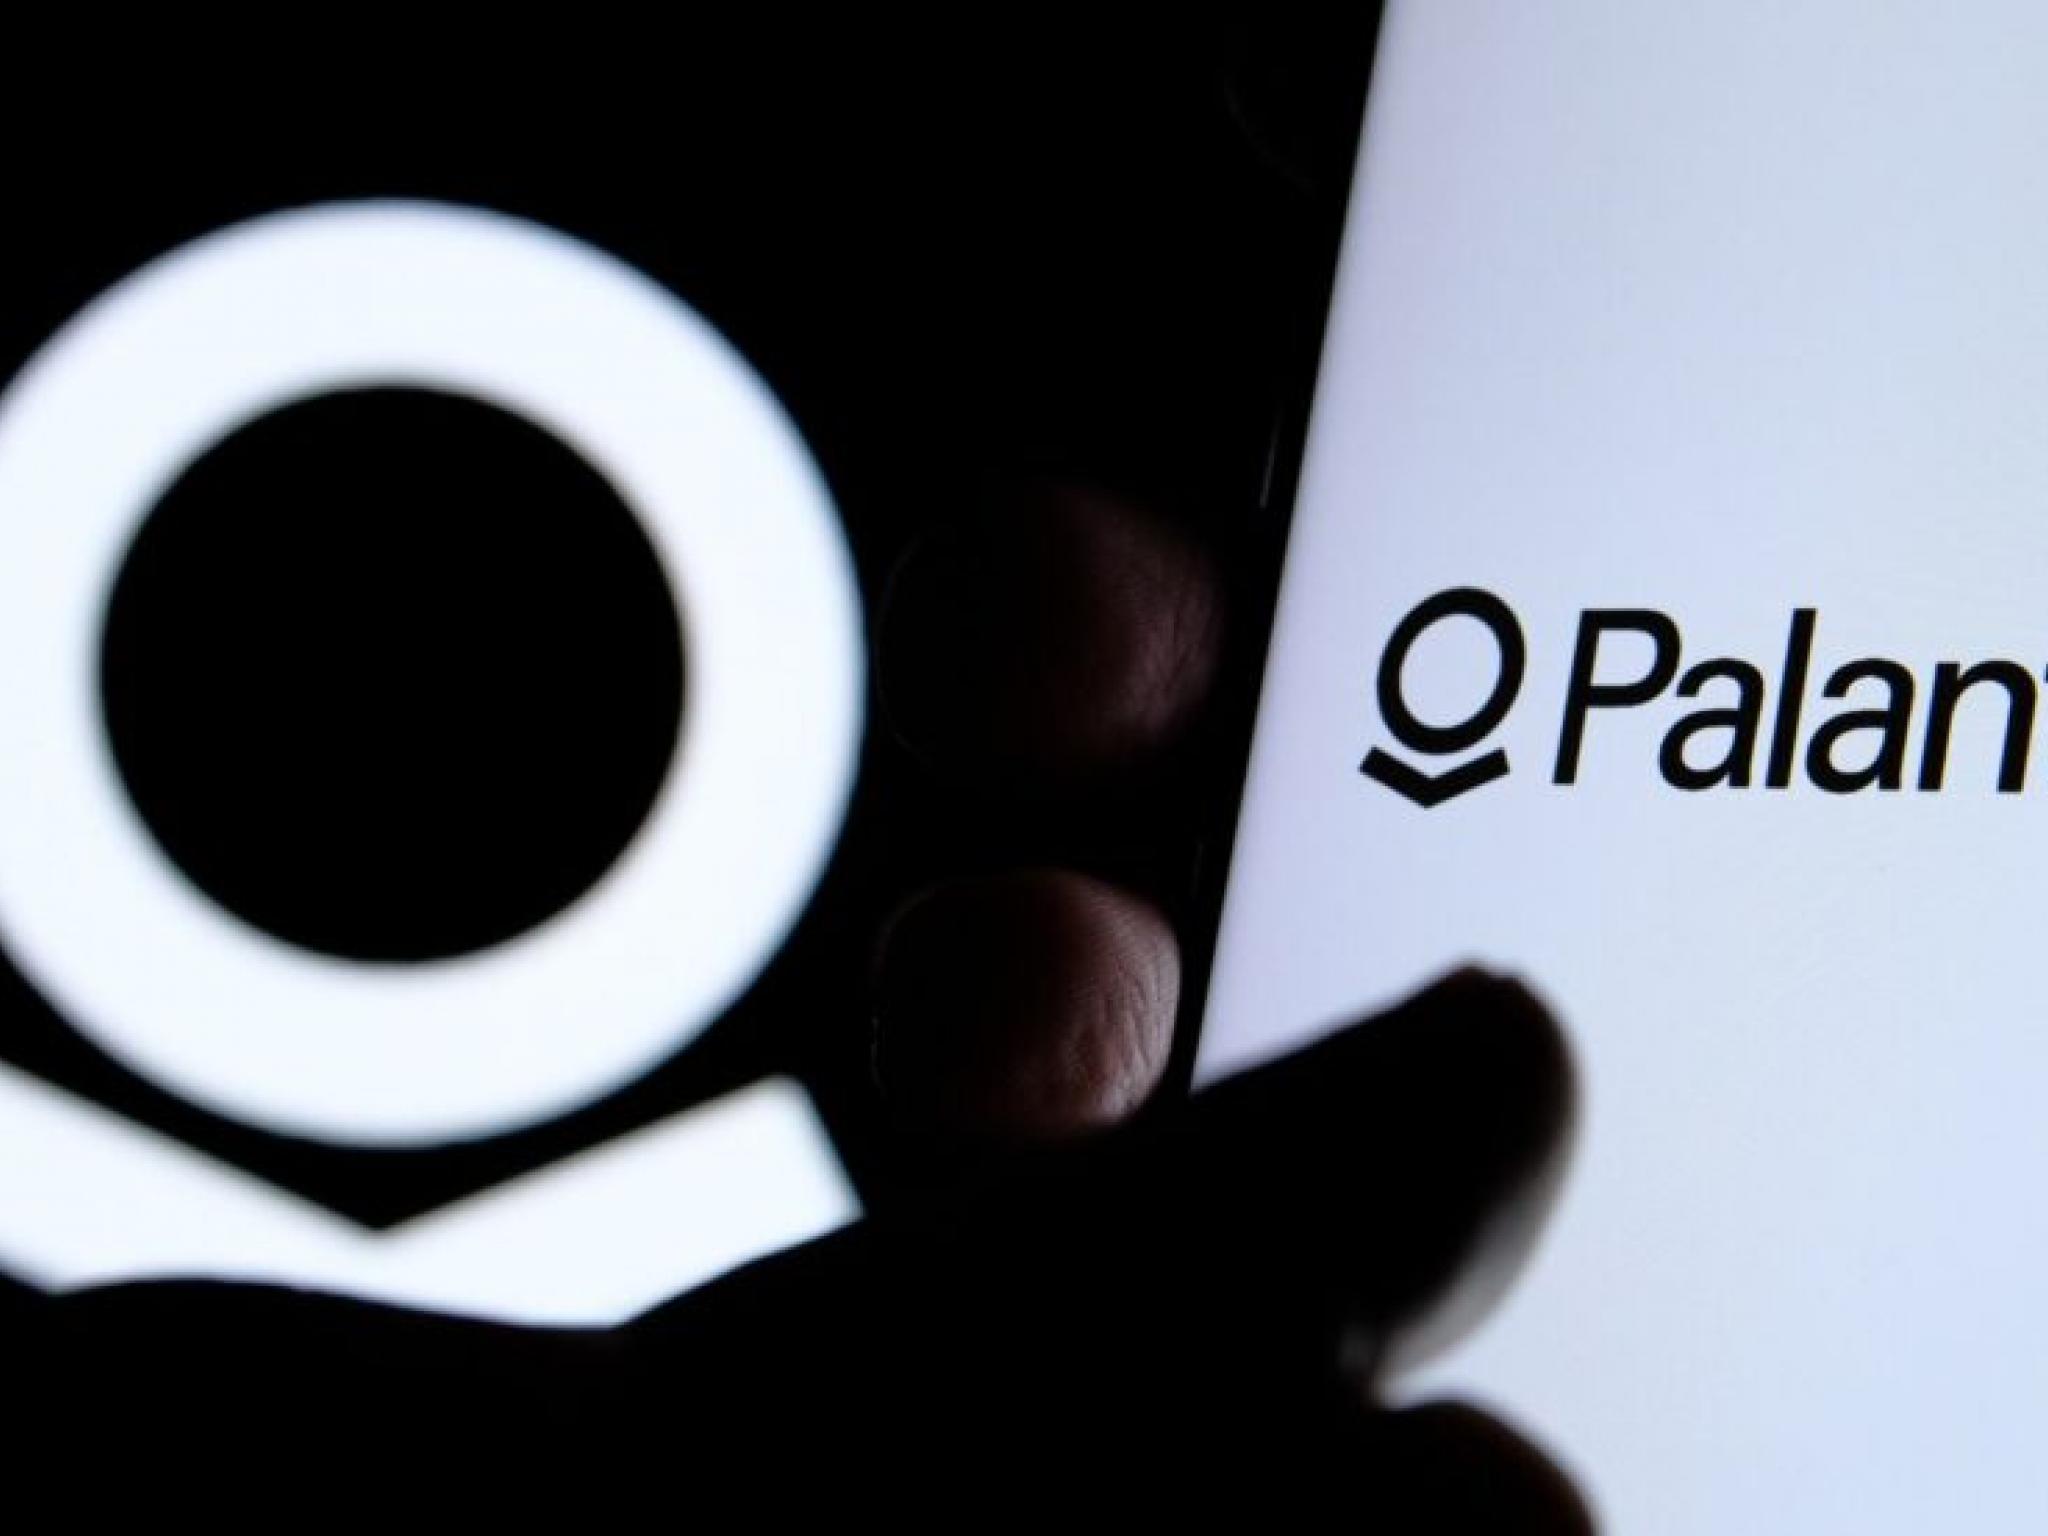  is-palantir-stock-the-most-underrated-ai-exposed-play-in-the-market 